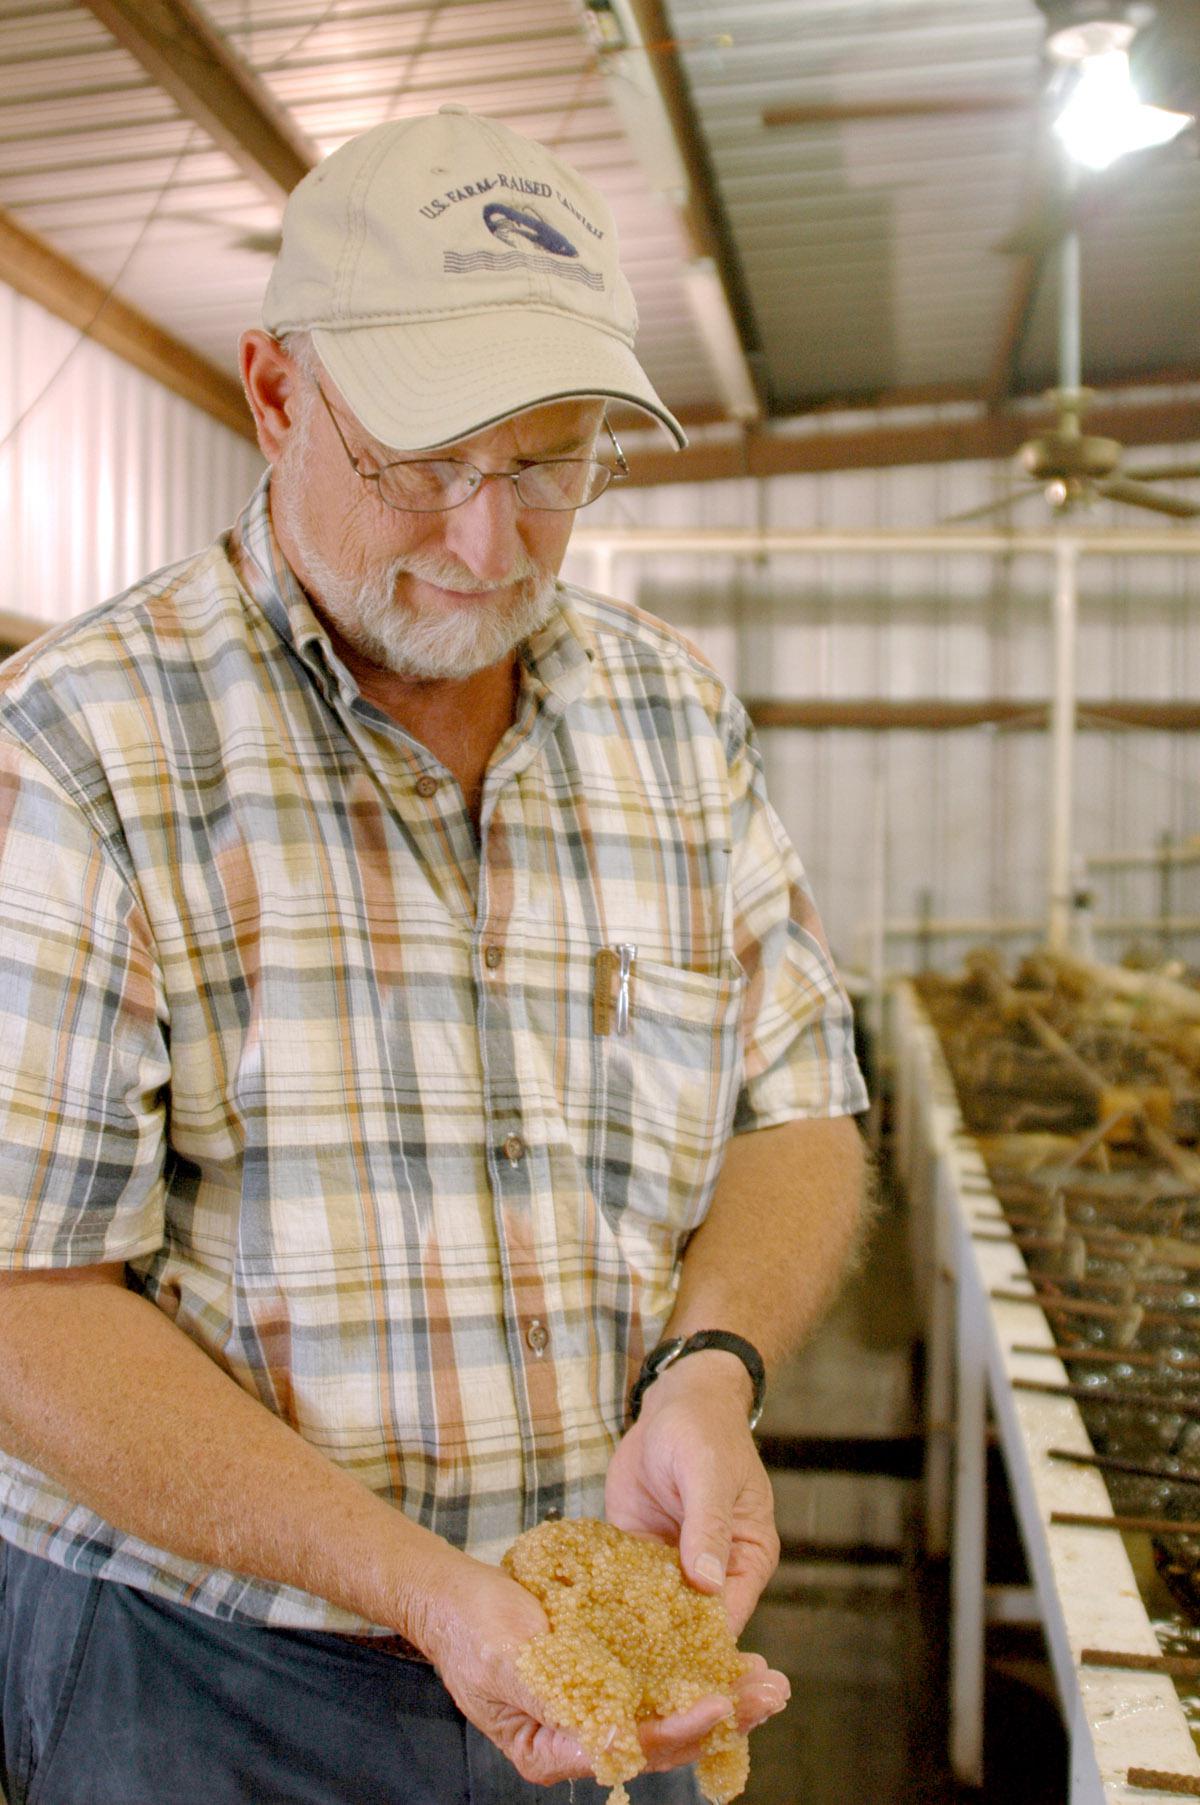 Mississippi State University Extension aquaculture specialist Jim Steeby inspects a catfish egg mass at the L&S Fish Farm catfish hatchery in Leland. (Photo by Robert H. Wells/MSU Delta Research and Extension Center)